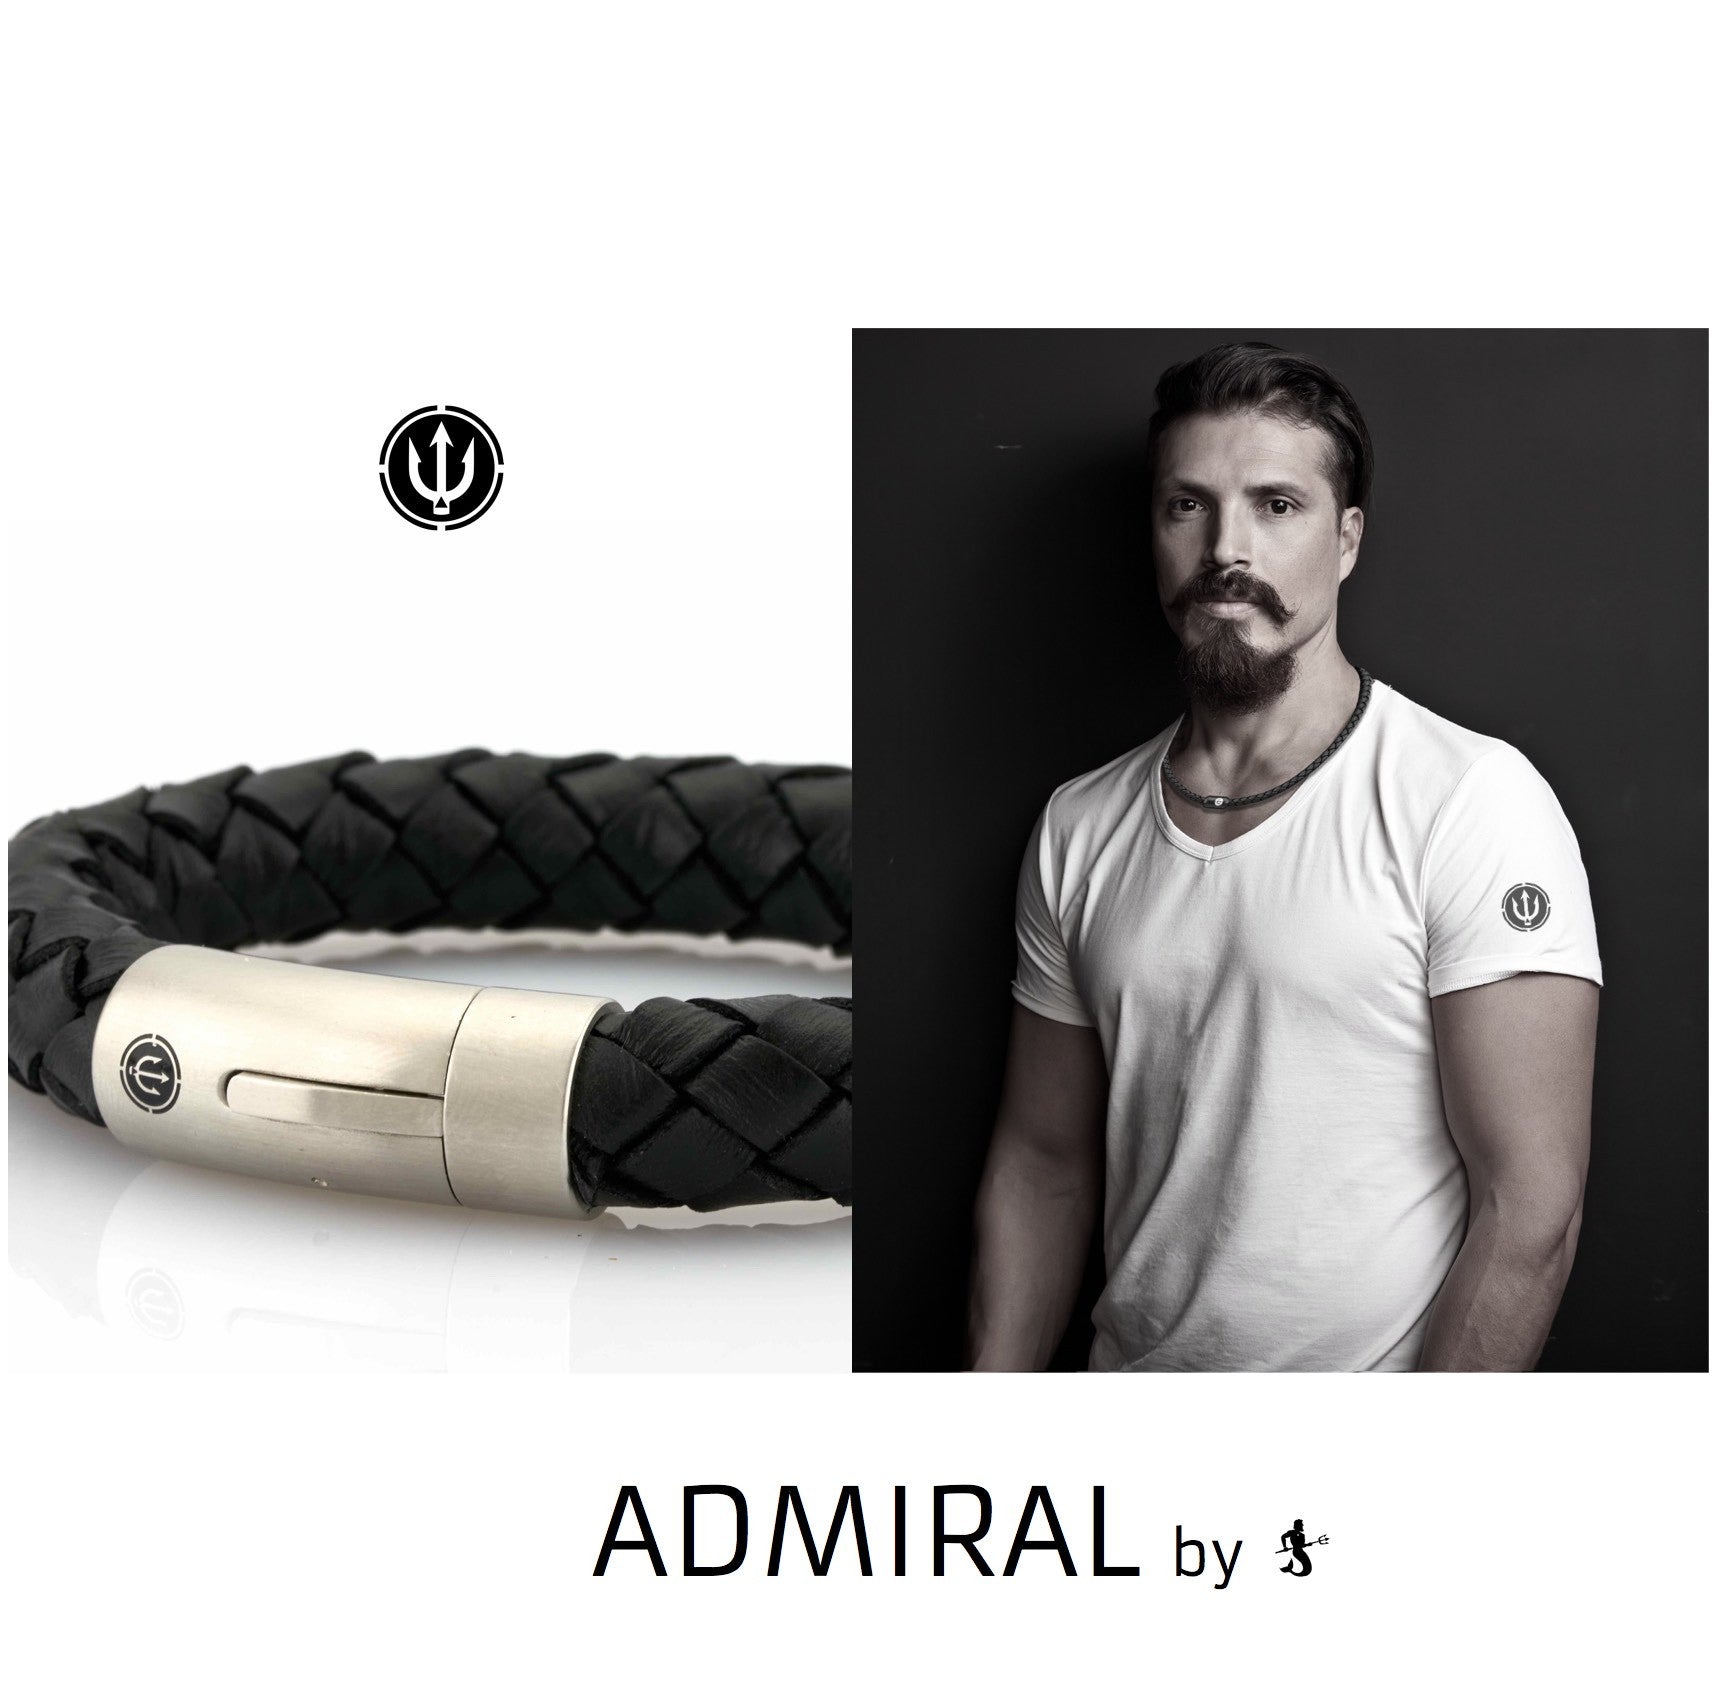 NEW: THE ADMIRAL.